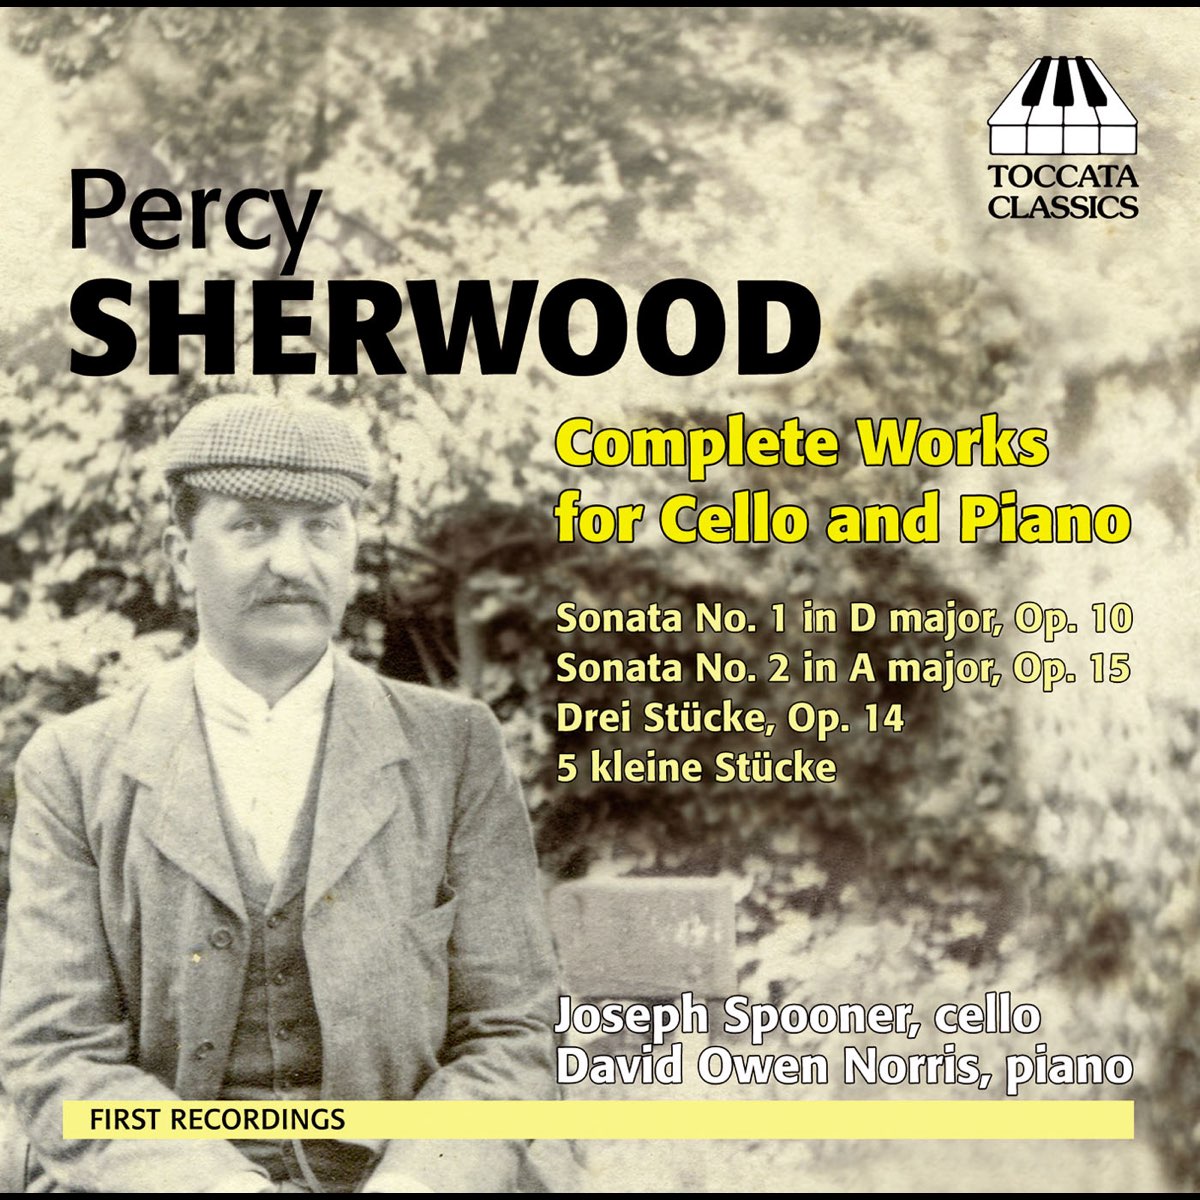 Percy Sherwood: Complete Works for Cello and Piano - Album by David Owen  Norris & Joseph Spooner - Apple Music